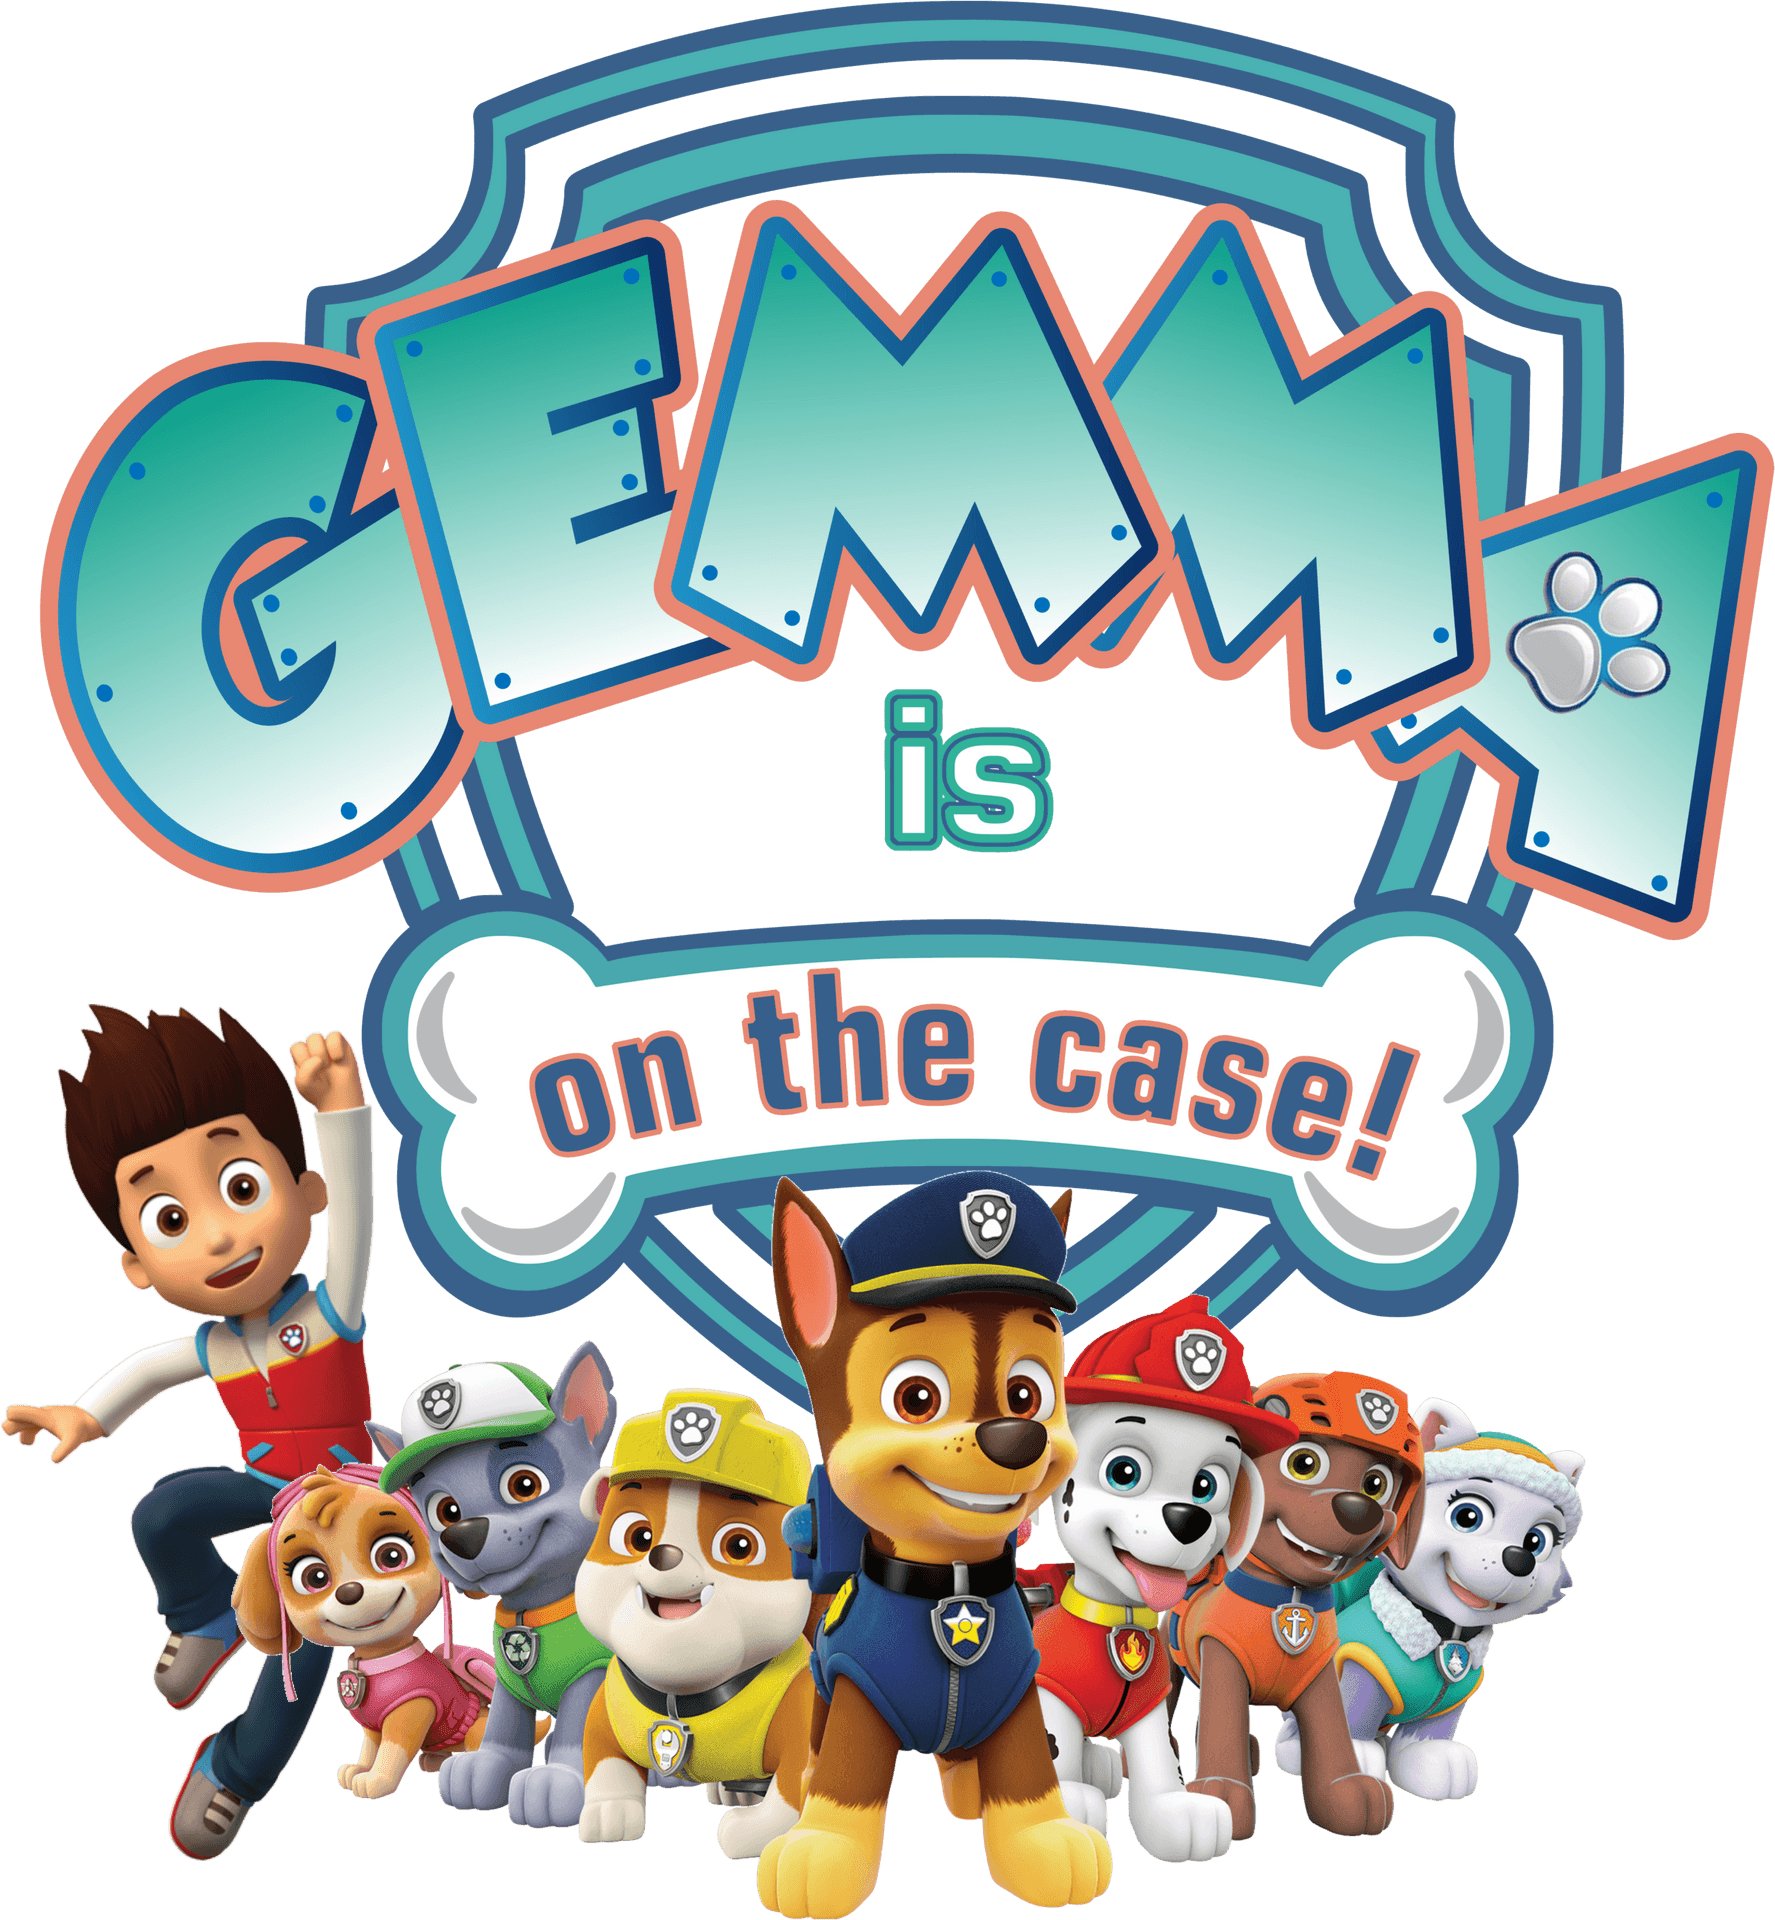 Paw Patrol Team On The Case PNG image